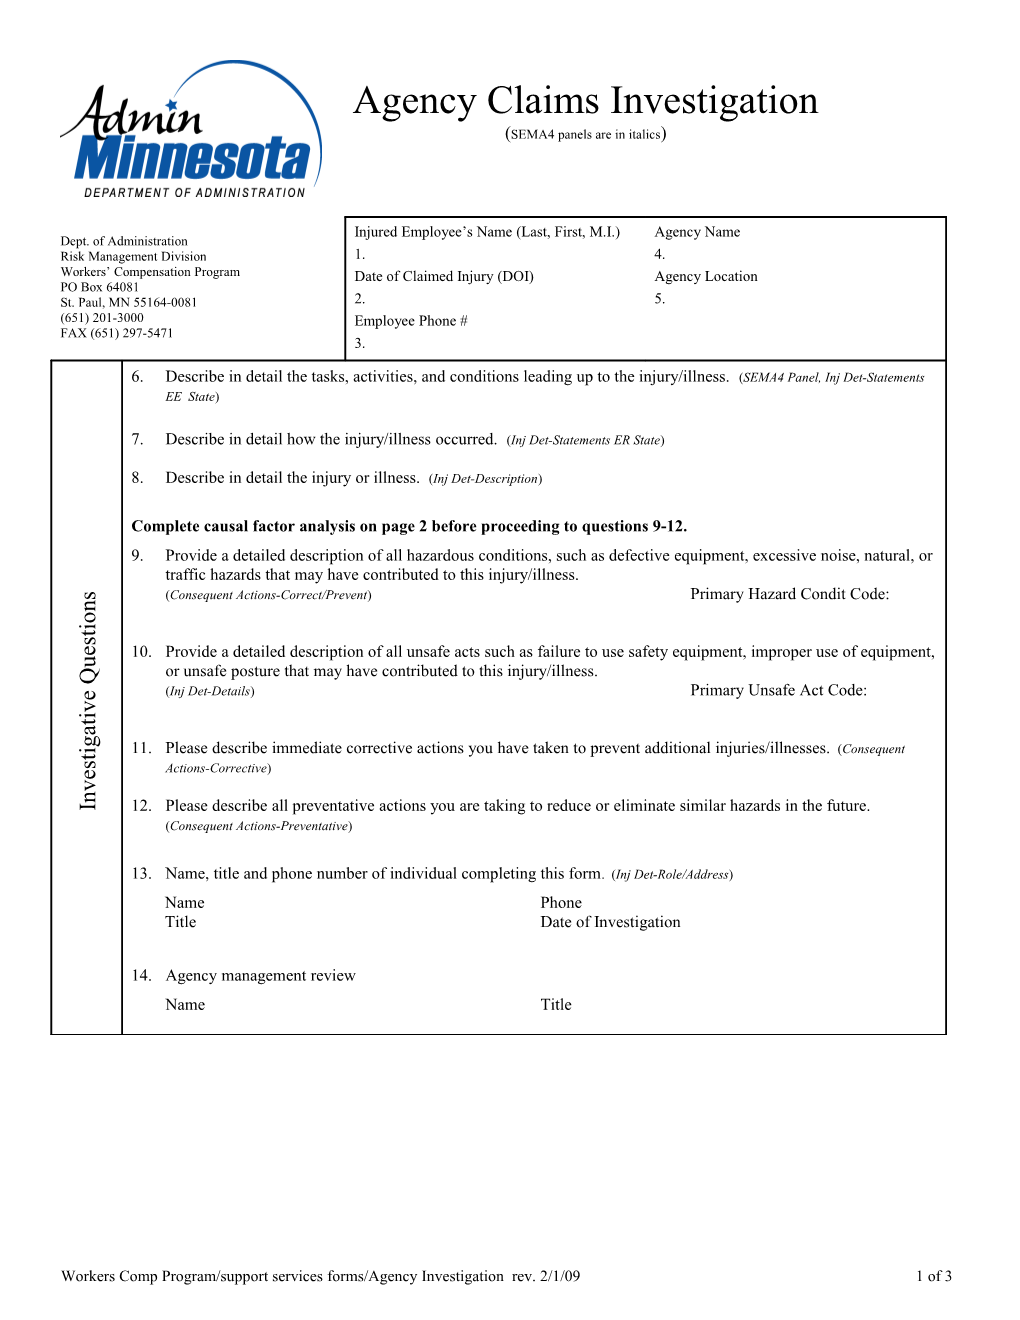 Agency Claims Investigation Form - PE-00630-03